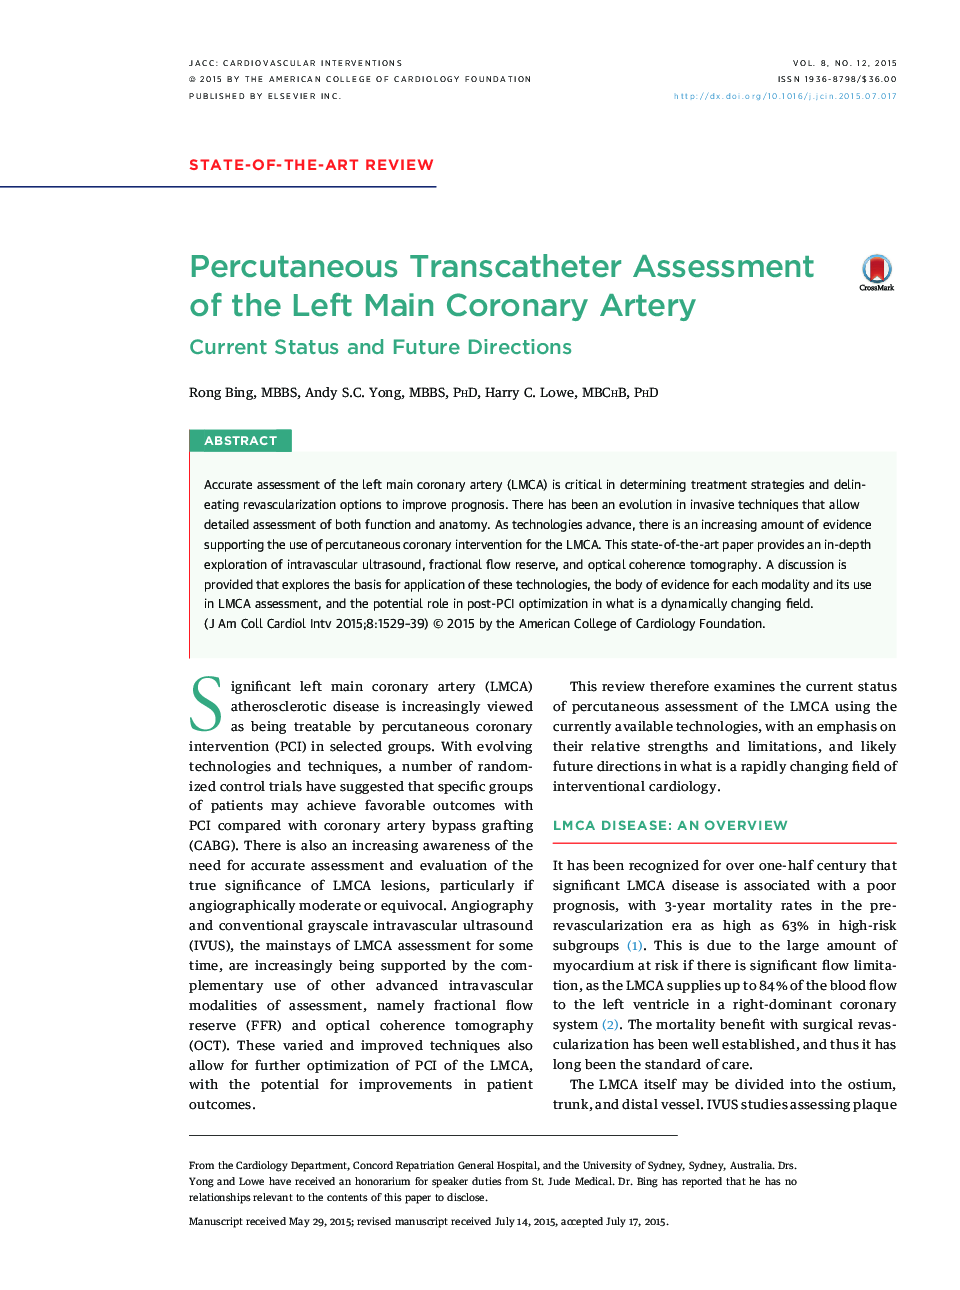 Percutaneous Transcatheter Assessment of the Left Main Coronary Artery : Current Status and Future Directions